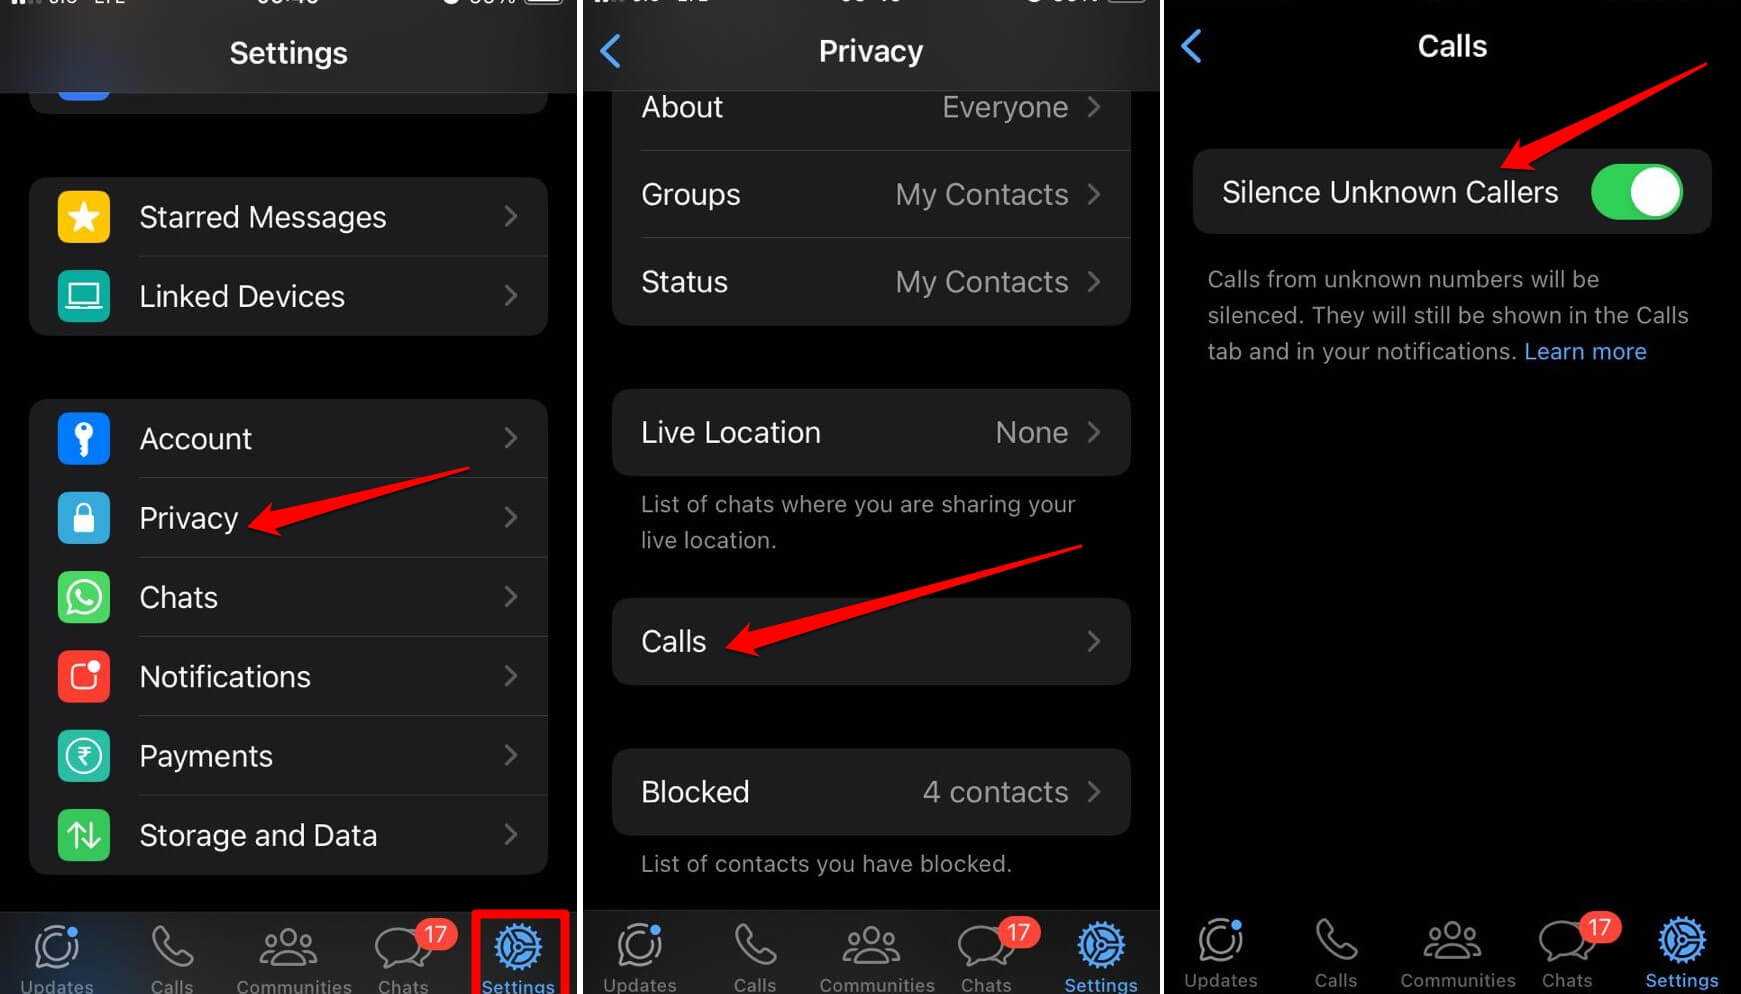 silence unknown callers on WhatsApp for iOS